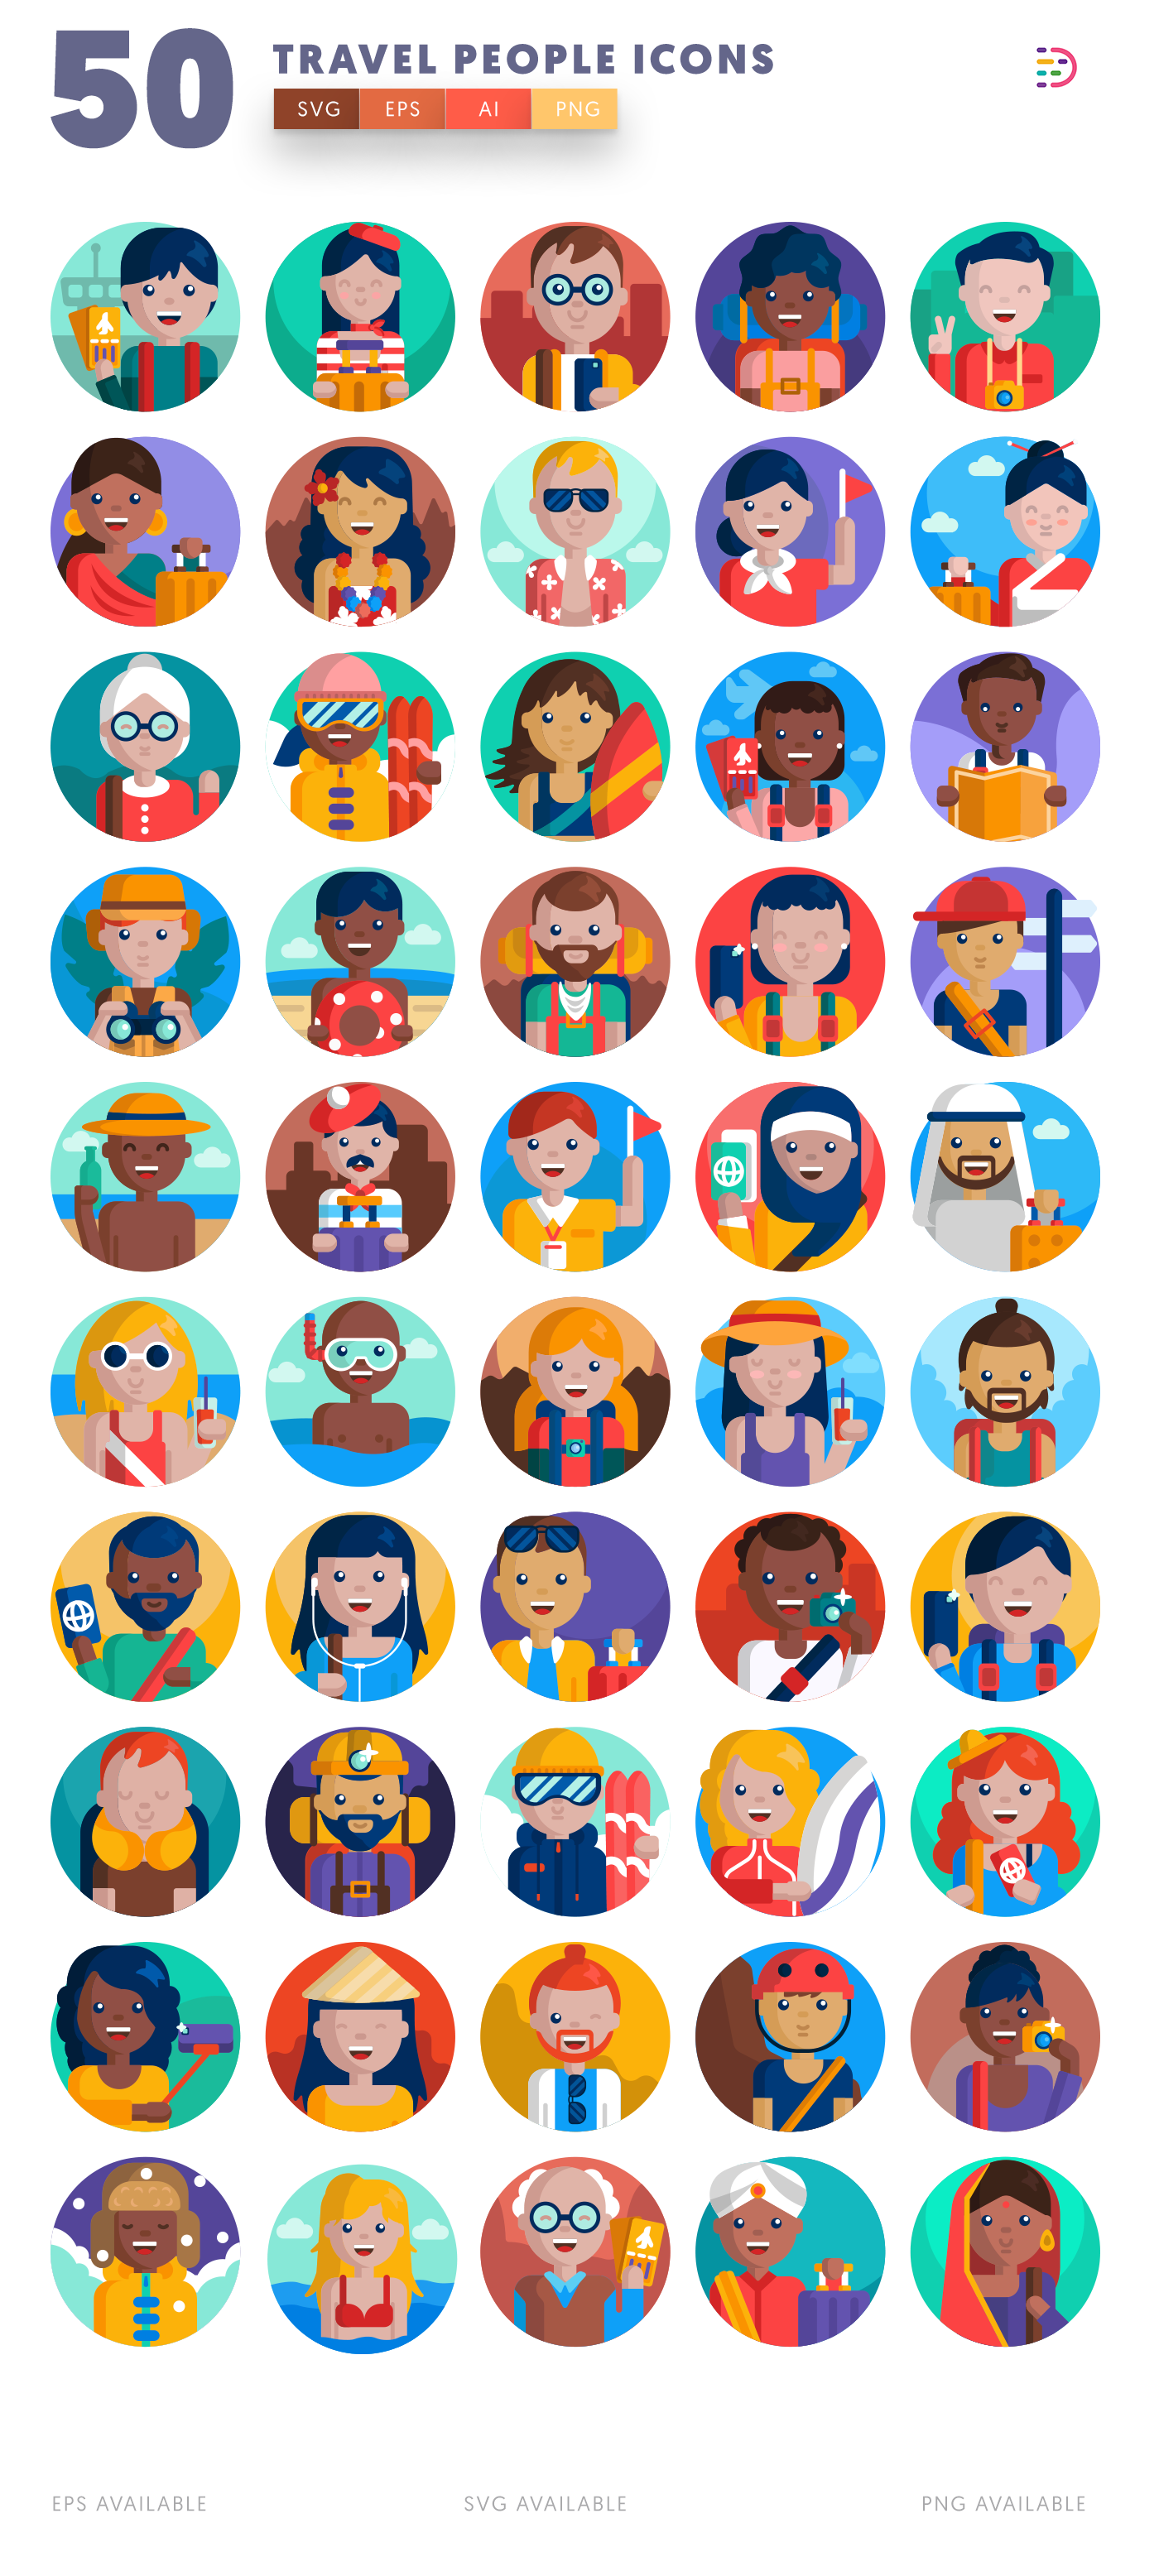 Design ready 50 Travel People Icons